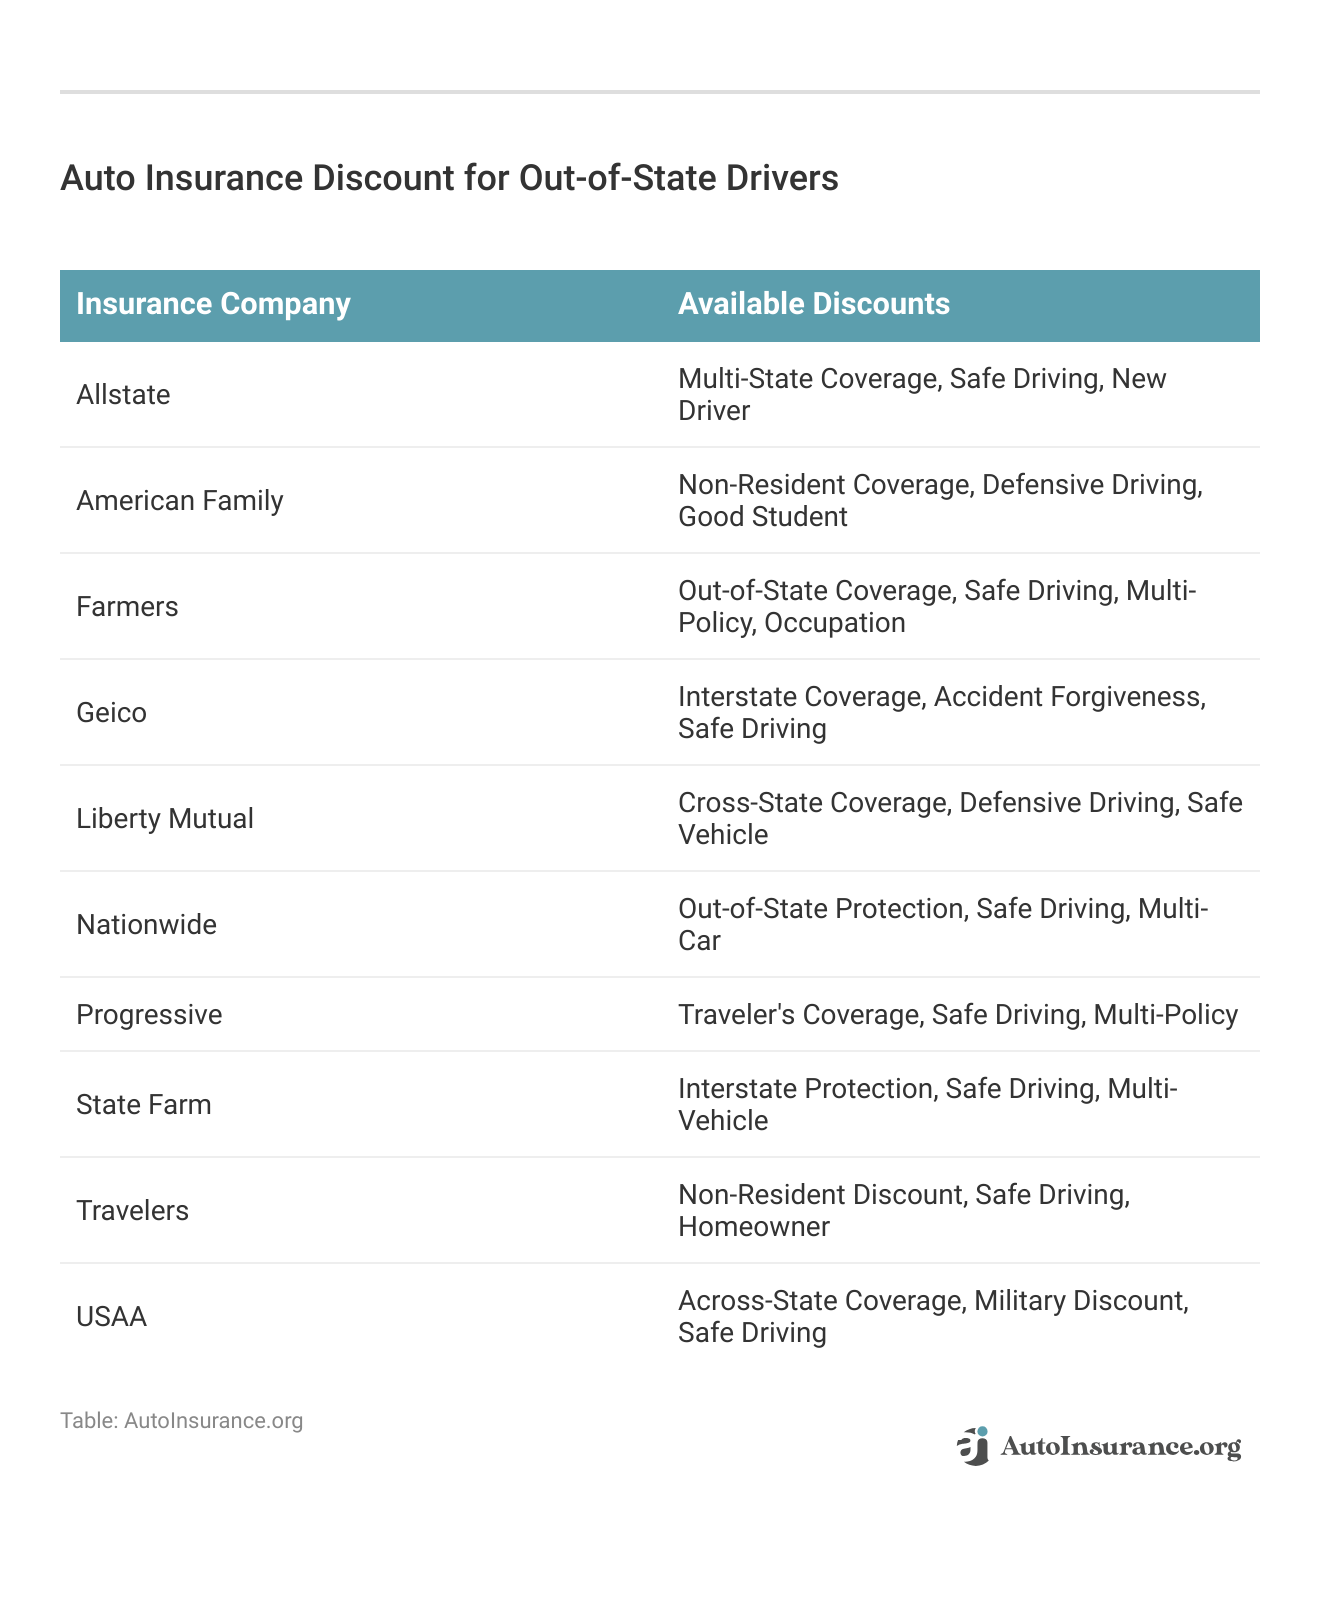 <h3>Auto Insurance Discount for Out-of-State Drivers</h3>